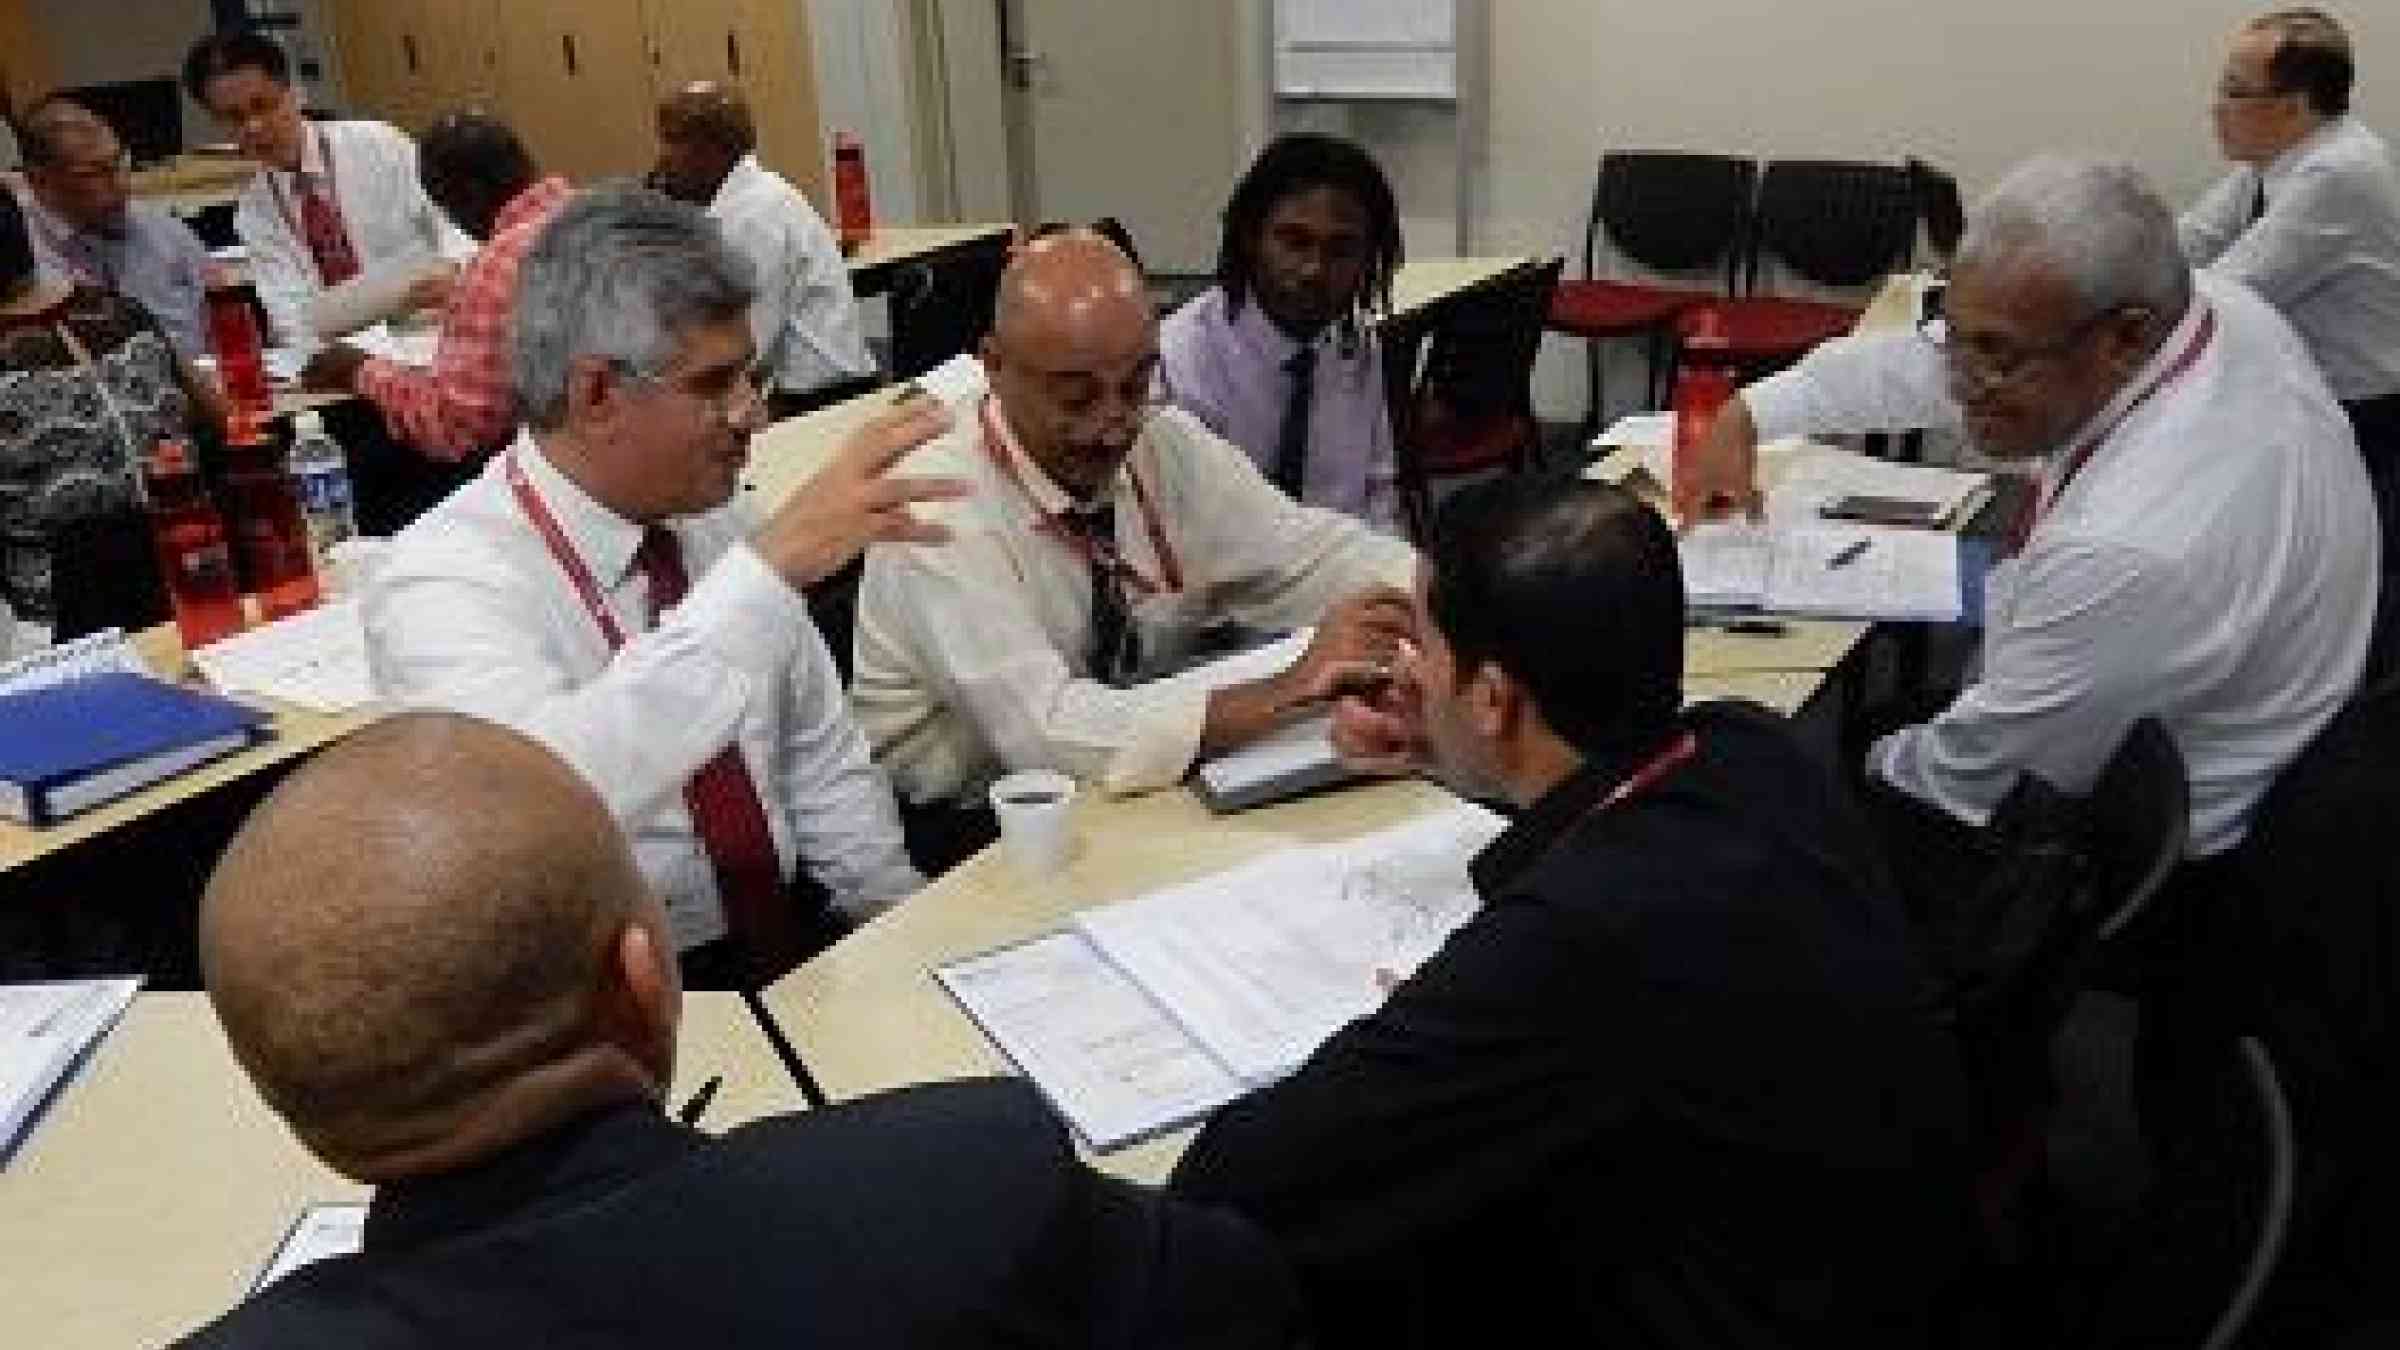 Deep in discussion: participants at the Singapore workshop debate ways to boost their countries' disaster risk management capacity (Photo: Nanyang Technological University – Centre for Continuing Education)